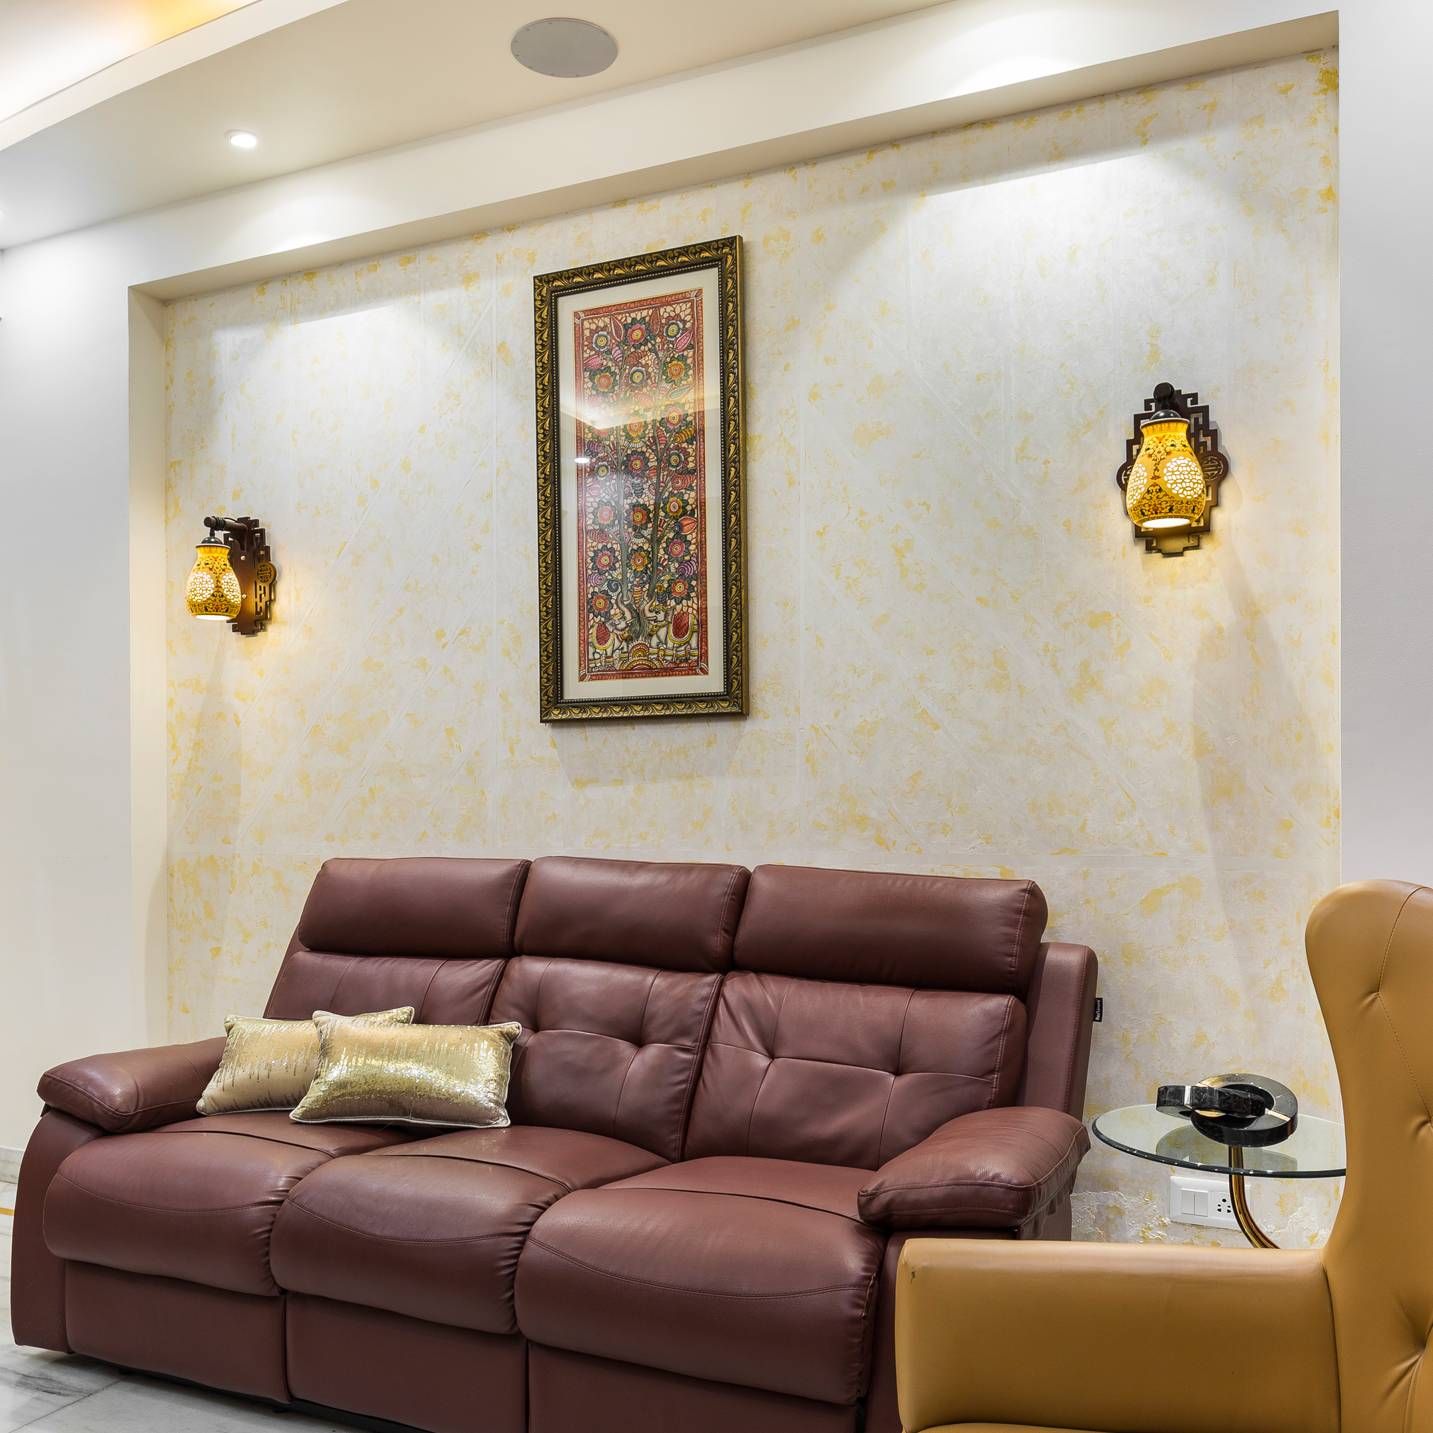 Modern Beige And Yellow Wallpaper Design With A Textured Finish